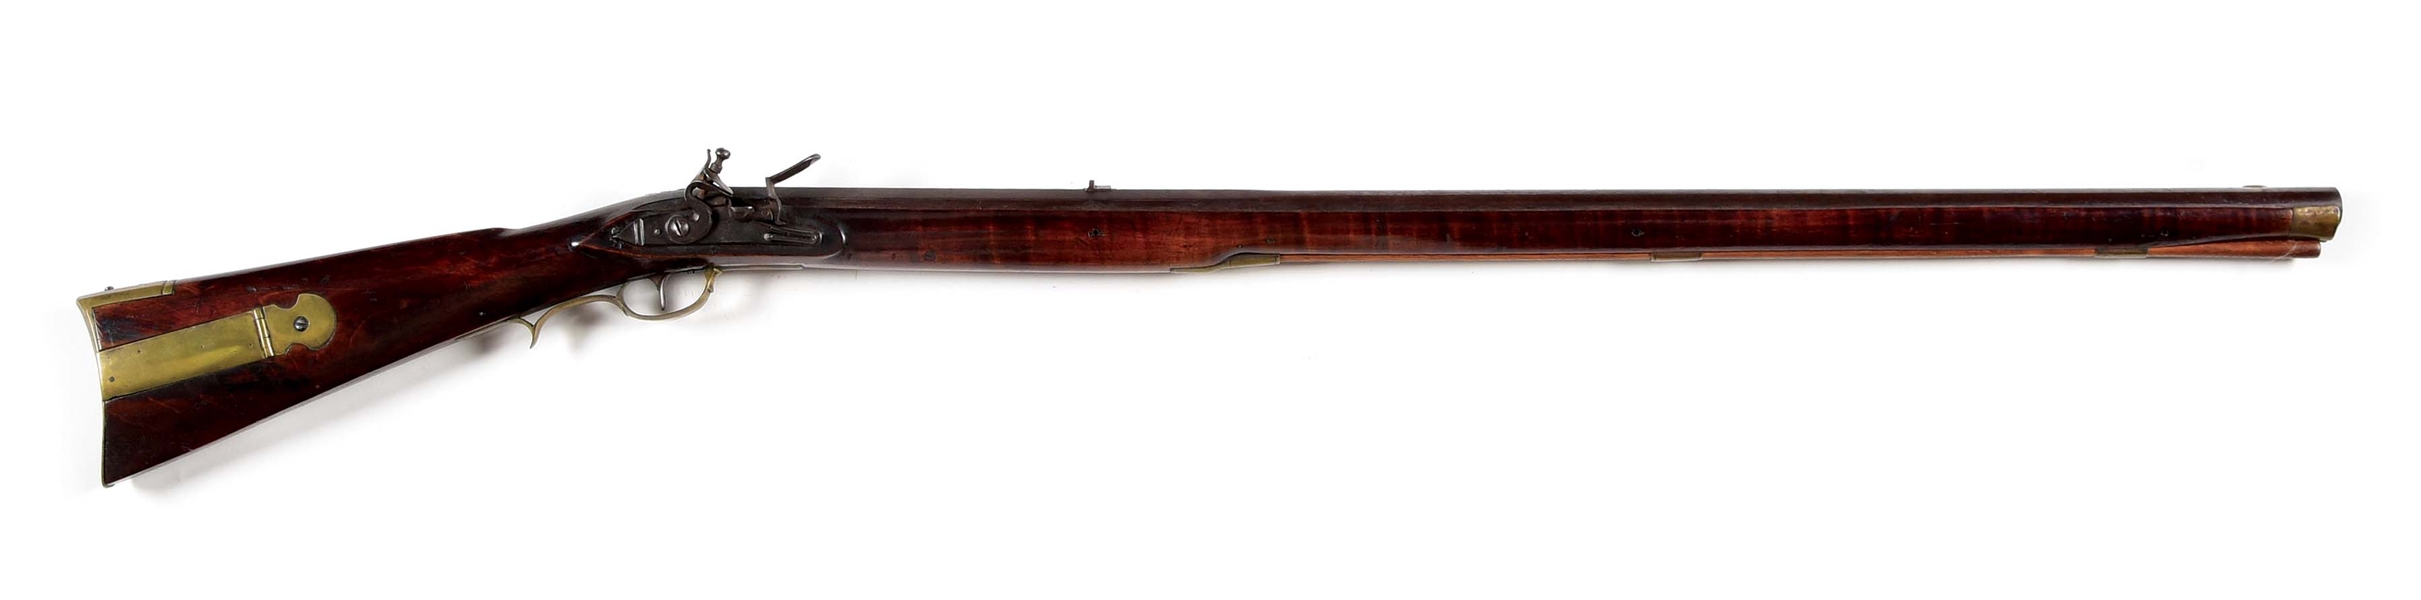 (A) SCARCE 1807 FLINTLOCK CONTRACT RIFLE BY J. HENRY.